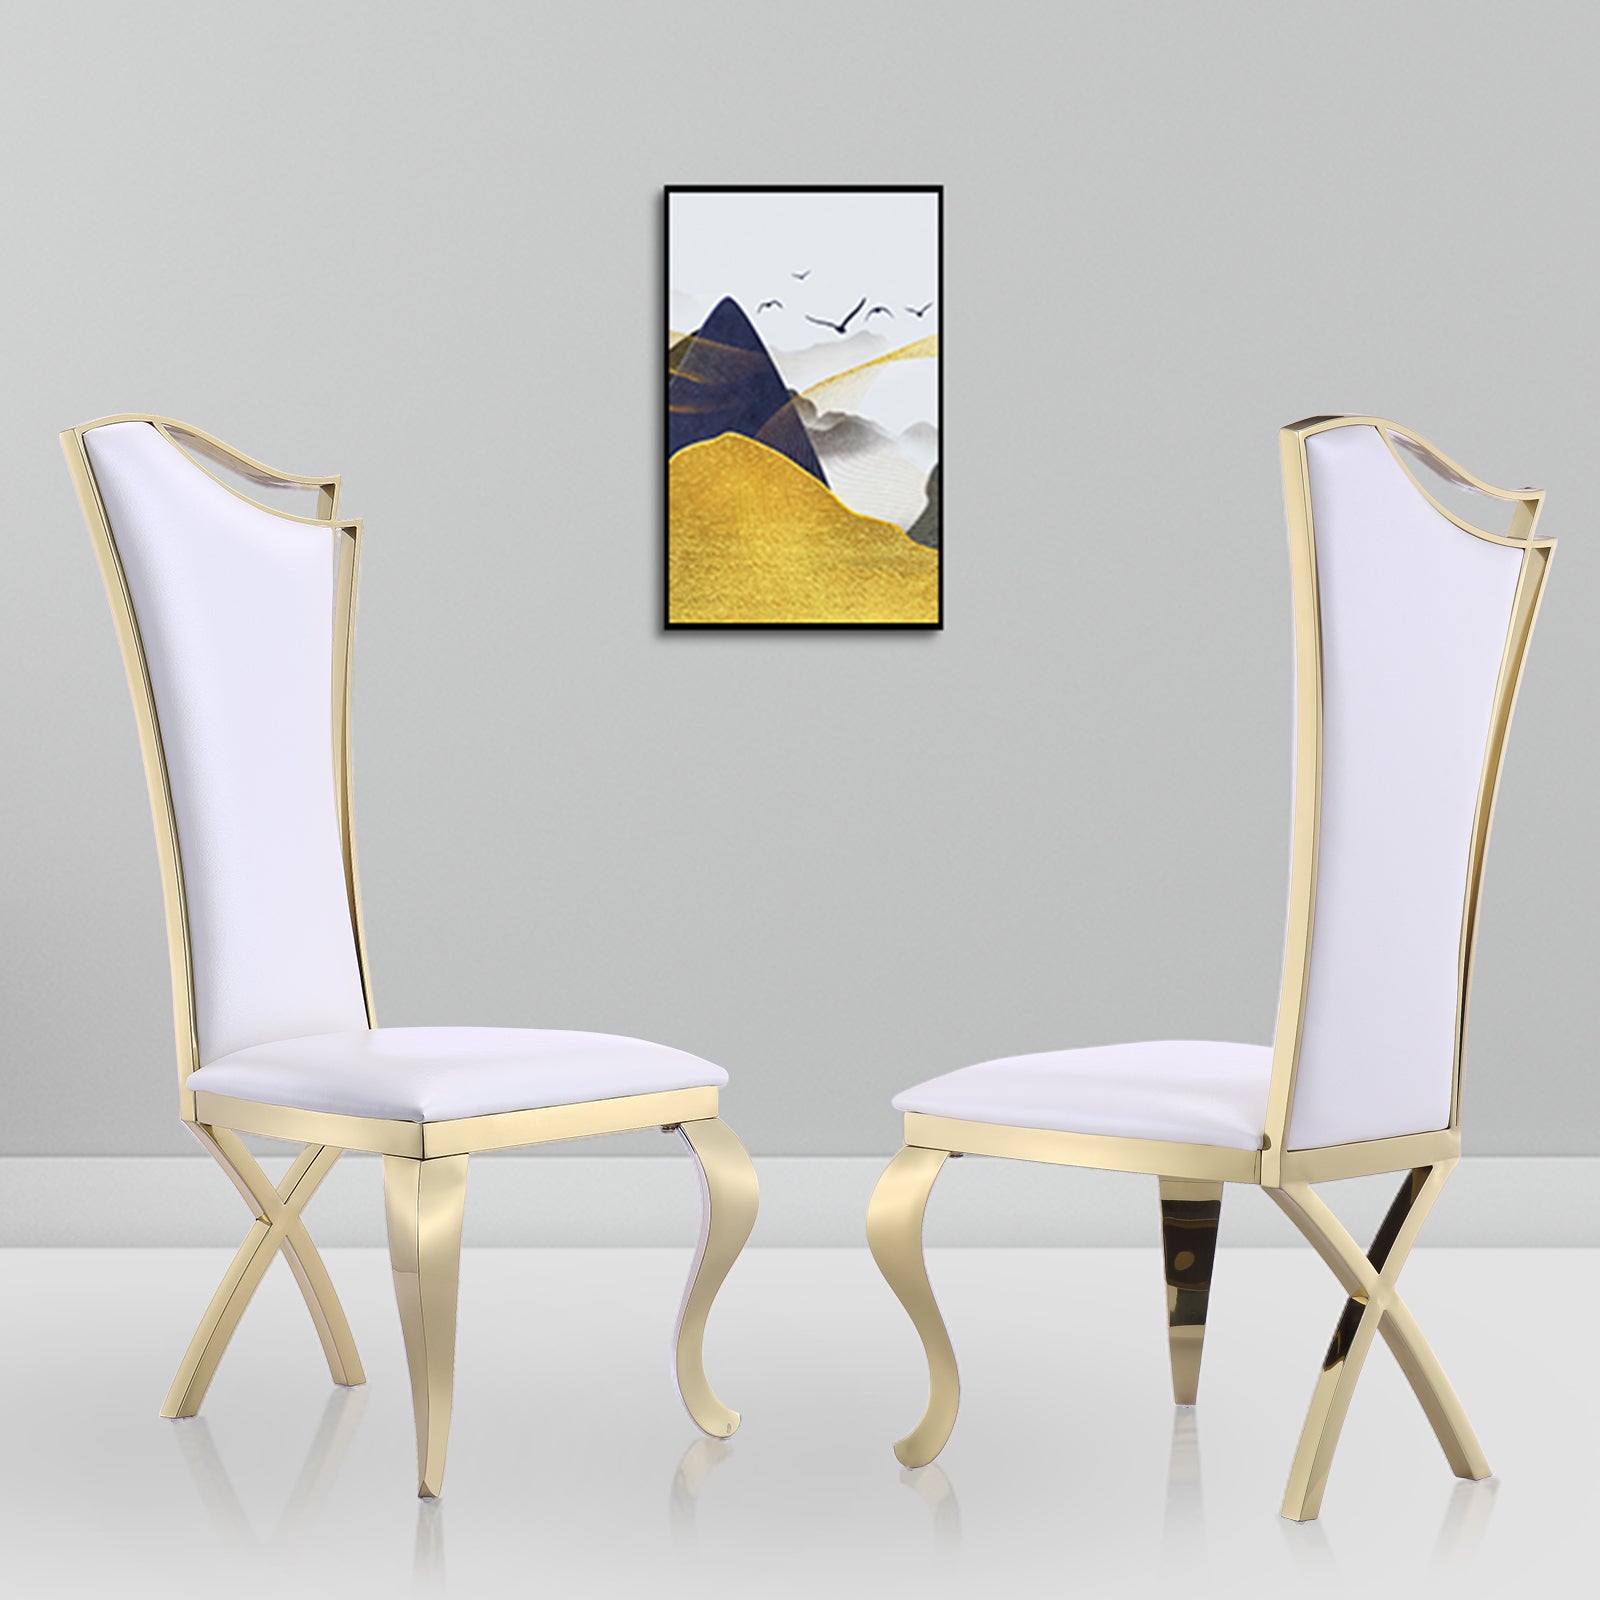 Enhance Your Dining Aesthetic with AUZ White and Gold Leather Upholstered Dining Chairs